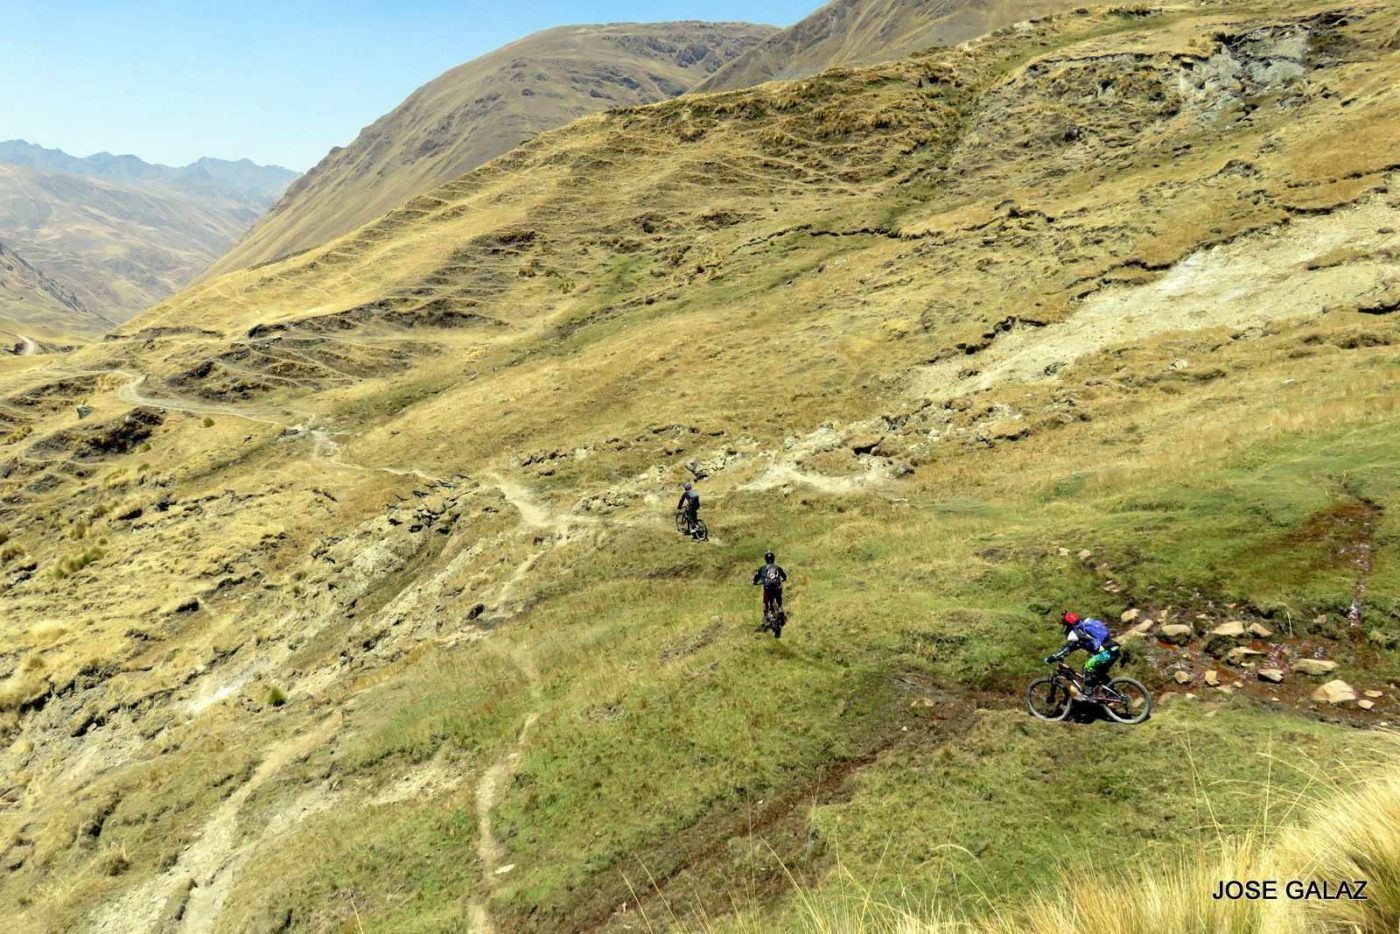 Distant view of three mountain bikers cutting across a grassy mountainside on narrow trails